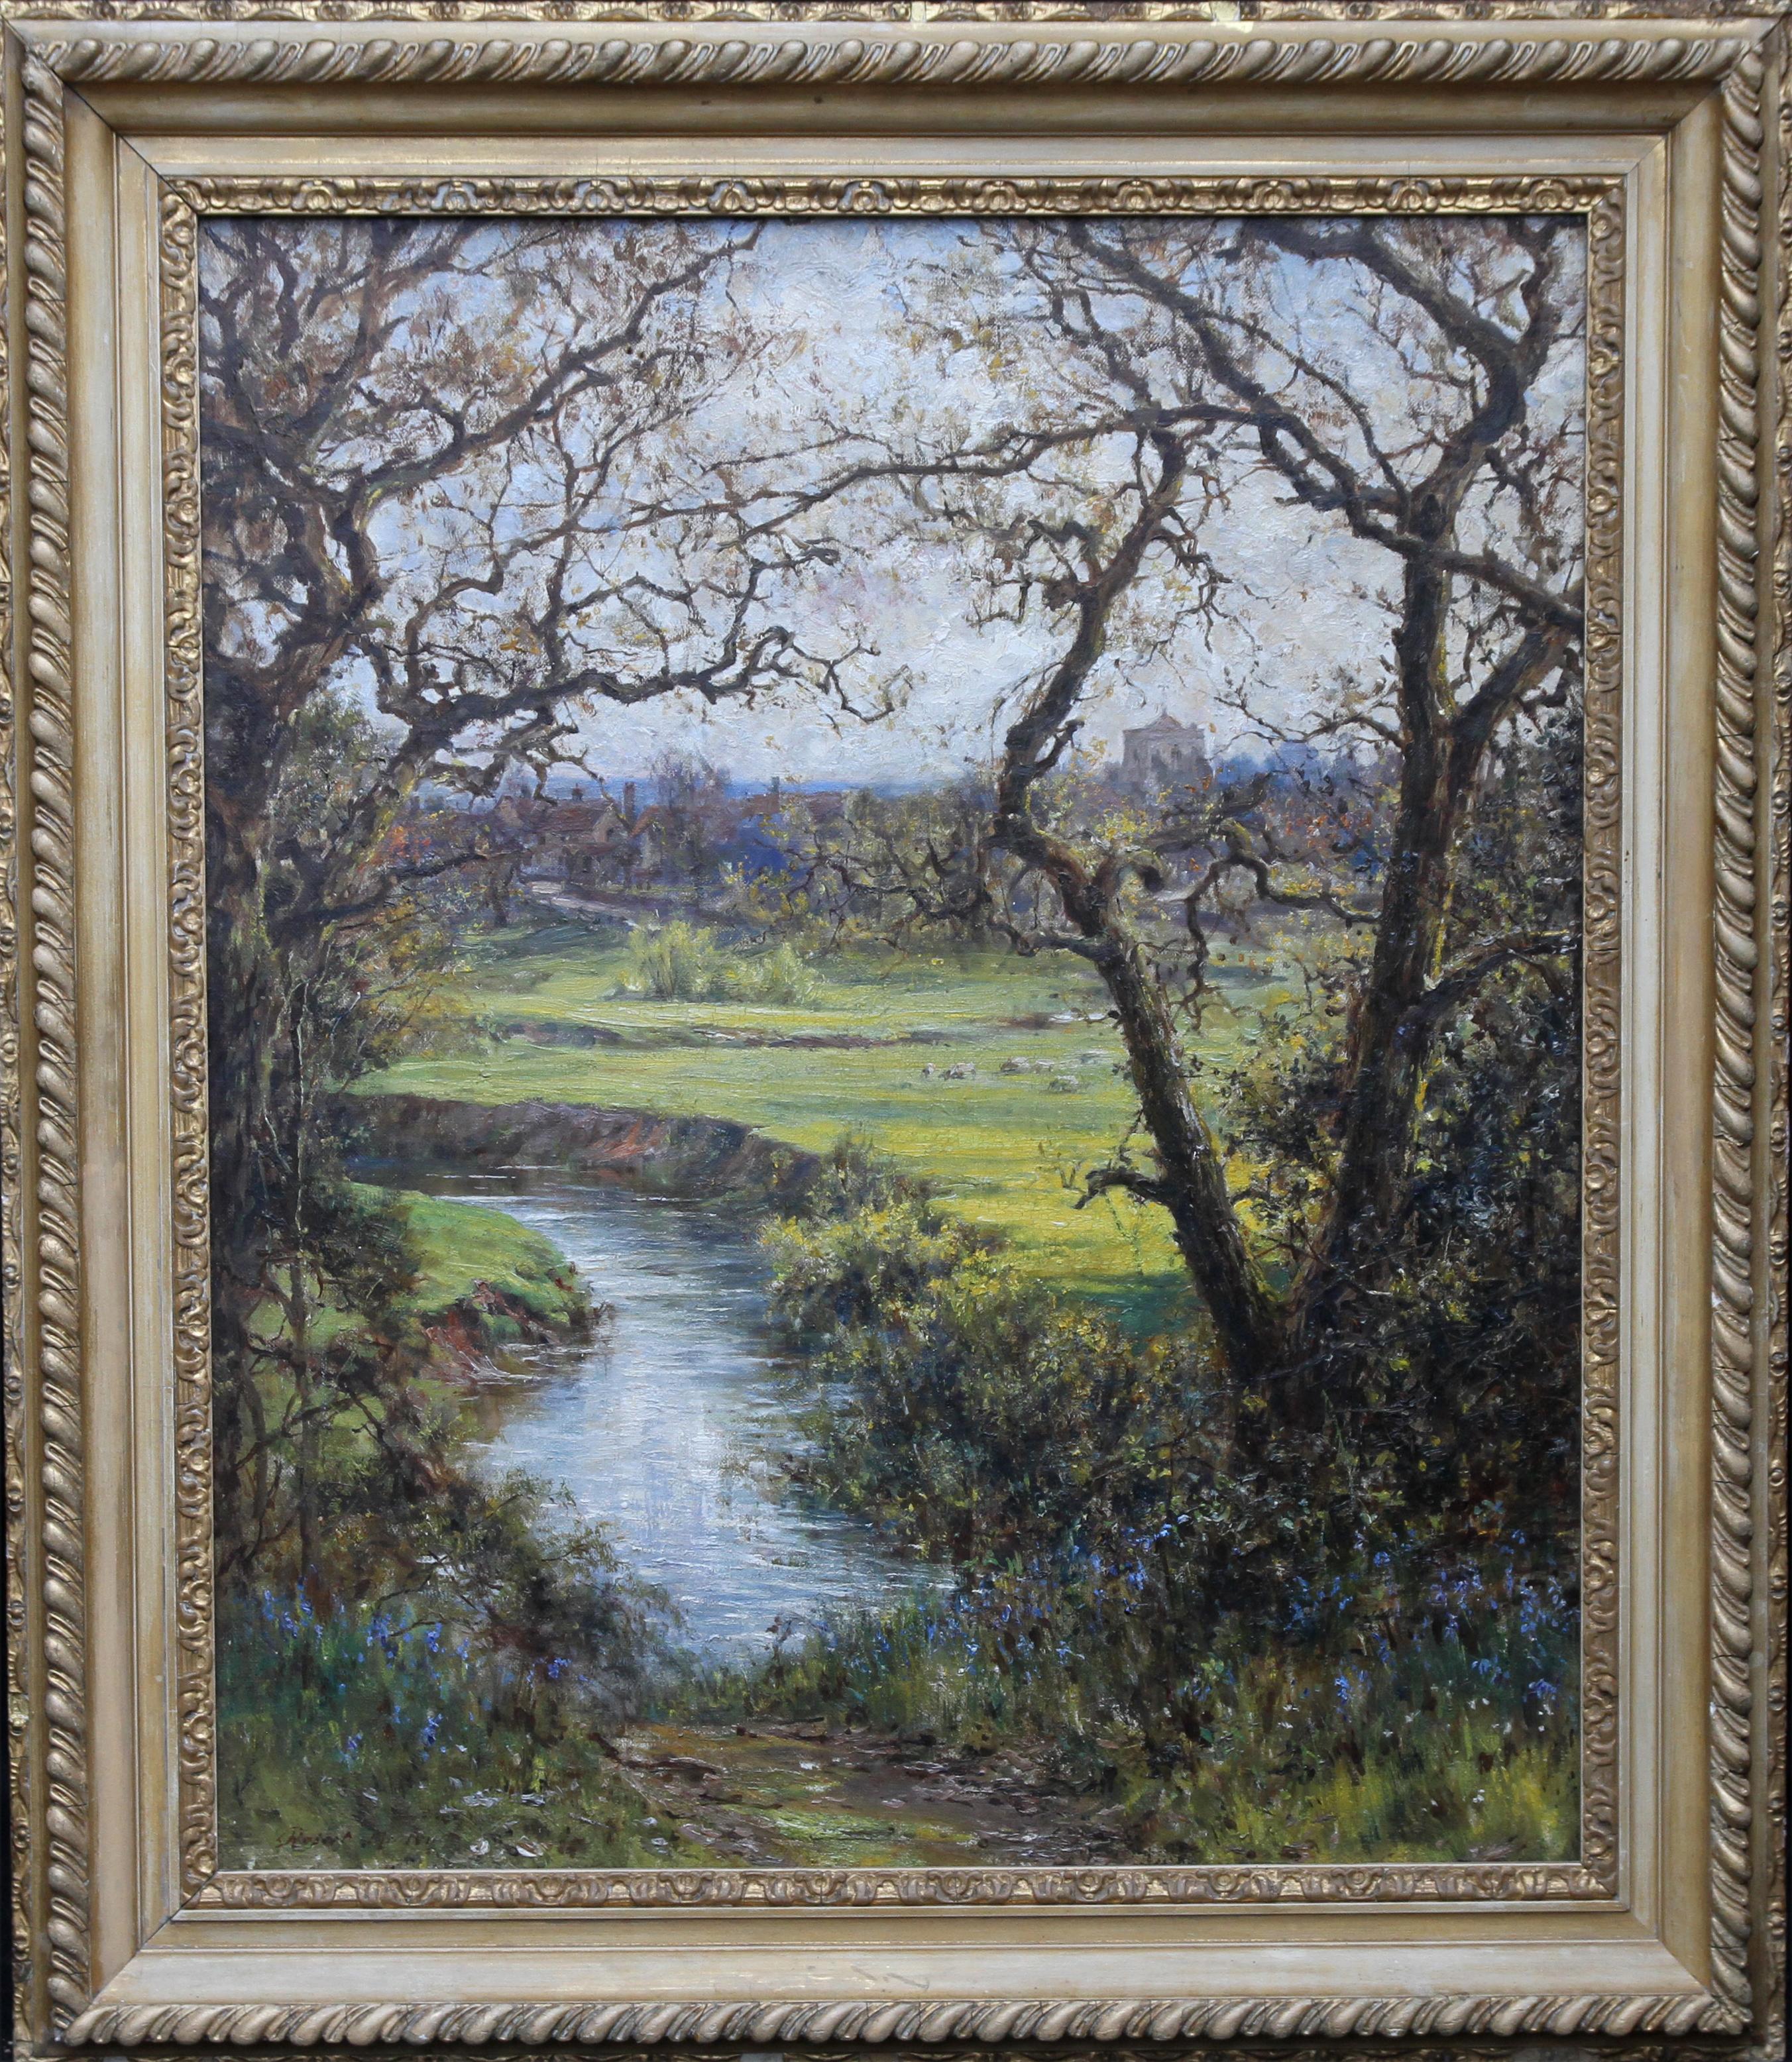 Surrey Landscape - British early 20thC Impressionist Slade School oil painting  For Sale 7